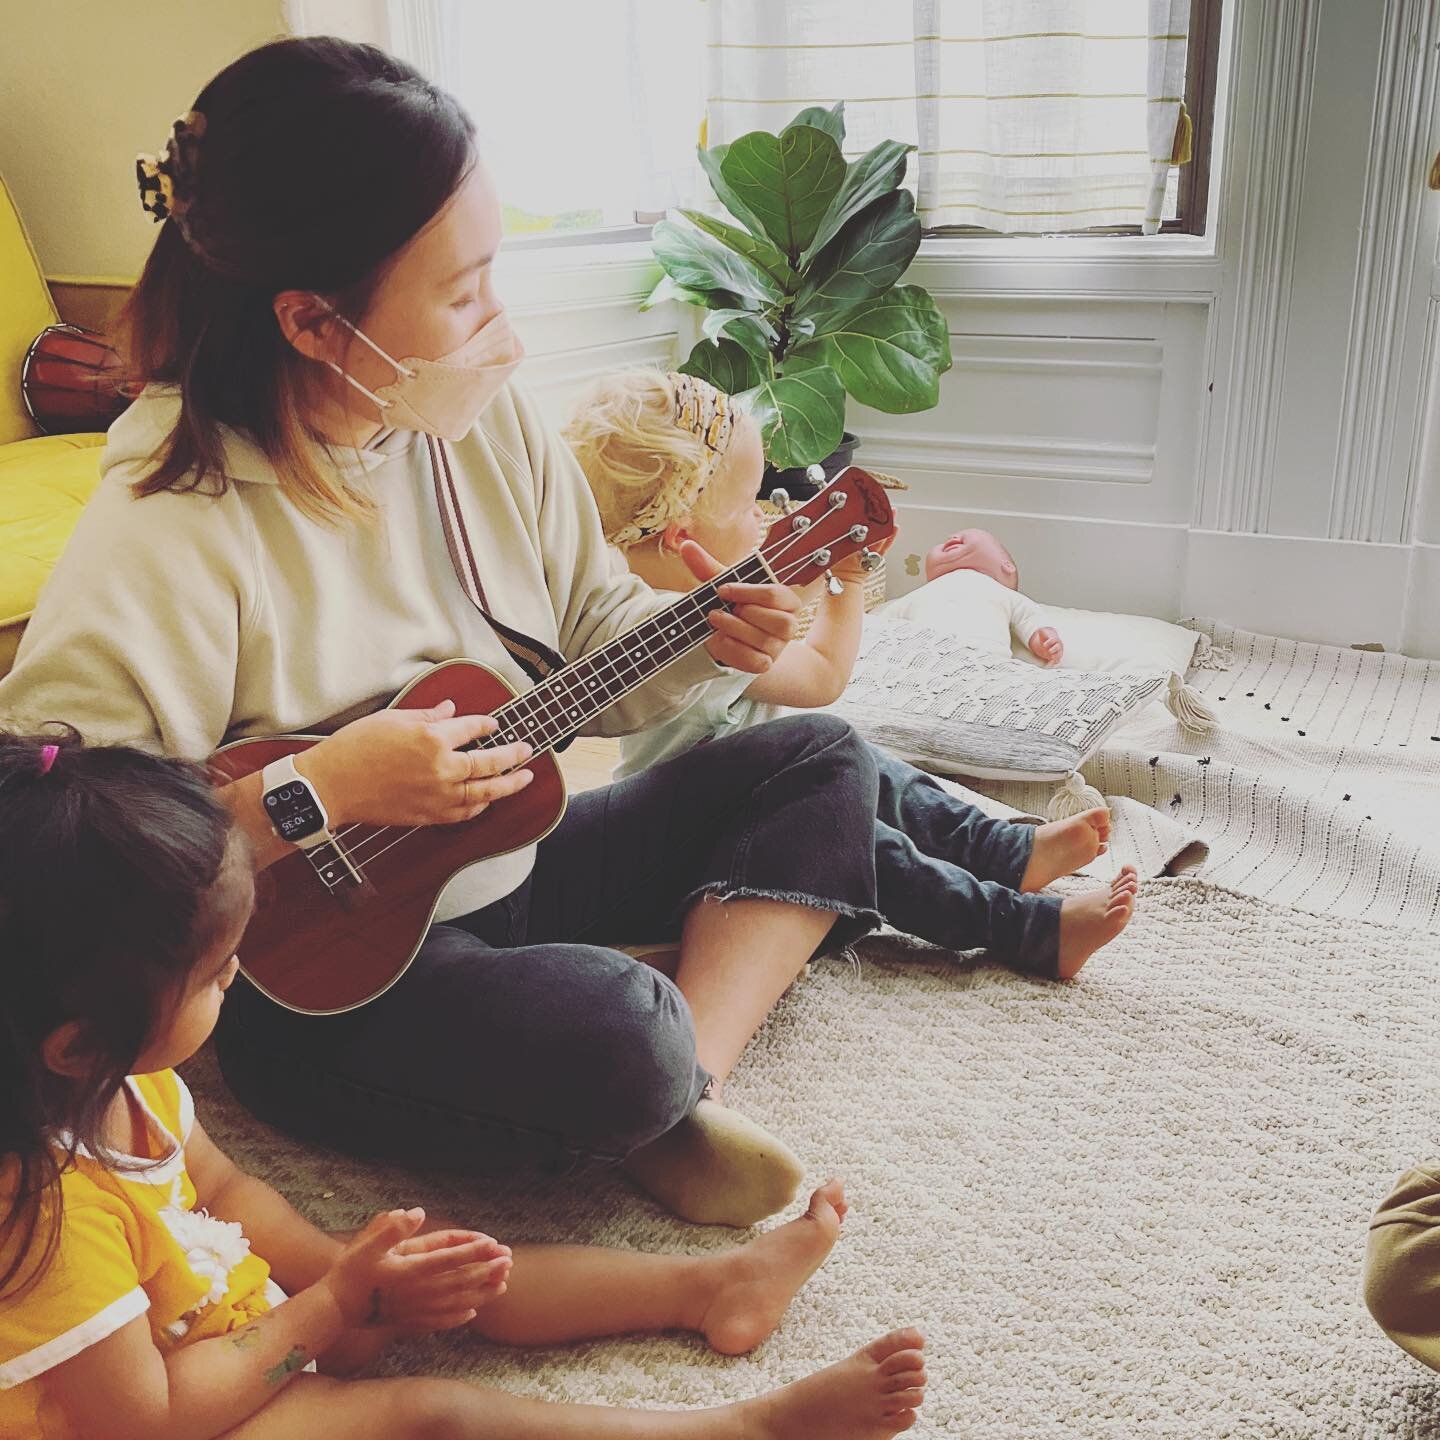 Singing and meditating every day with children🙏🏽🌈 Eat, Work, Sing❤️ 

Only repetition makes us build a skill. In a Montessori environment, the children freely choose their work, followed by their inner teacher. We, as a guide, observe and carefull